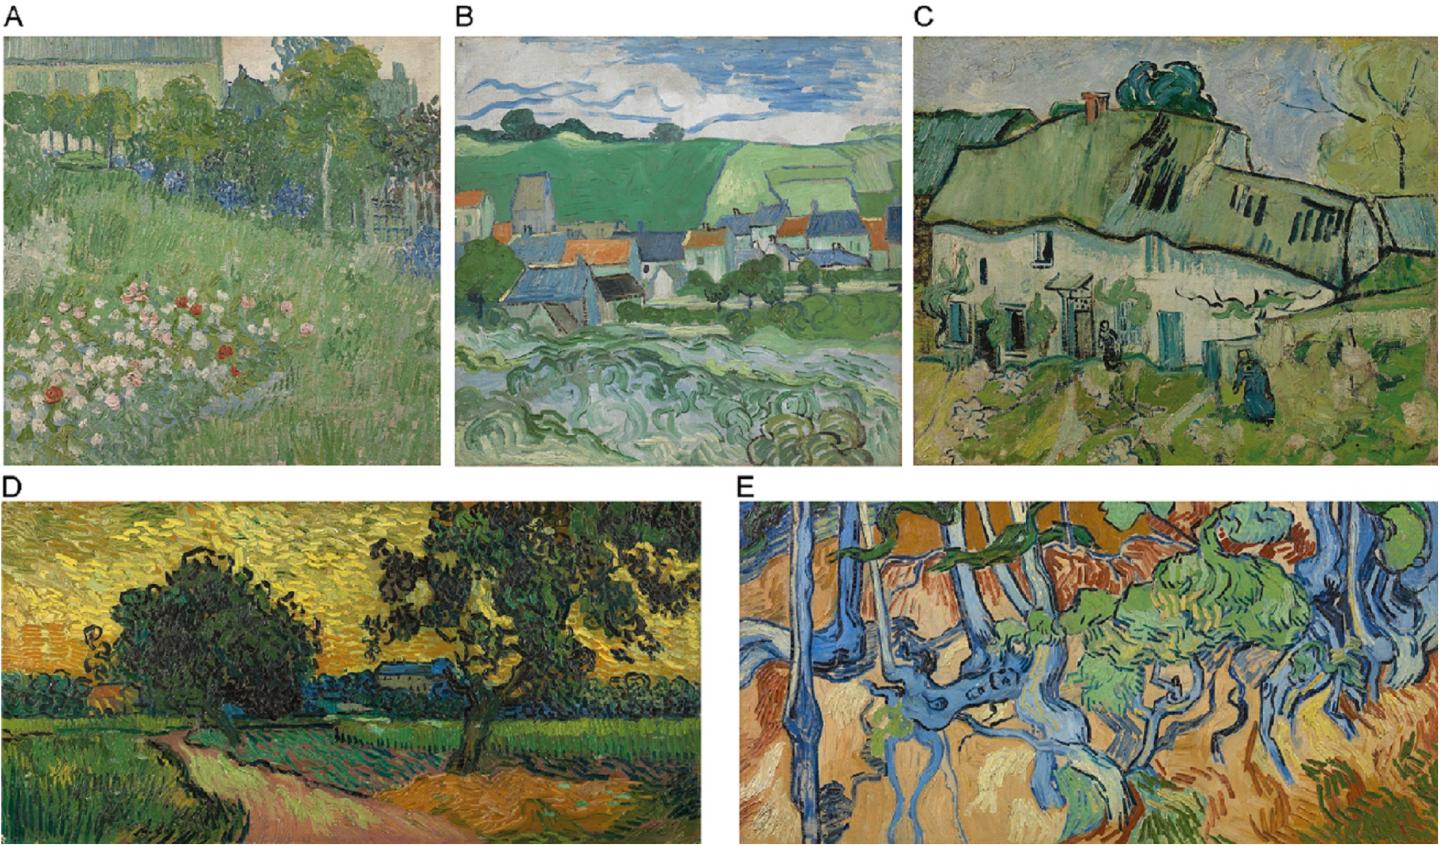 Prior Knowledge May Influence How Adults View Van Goghs